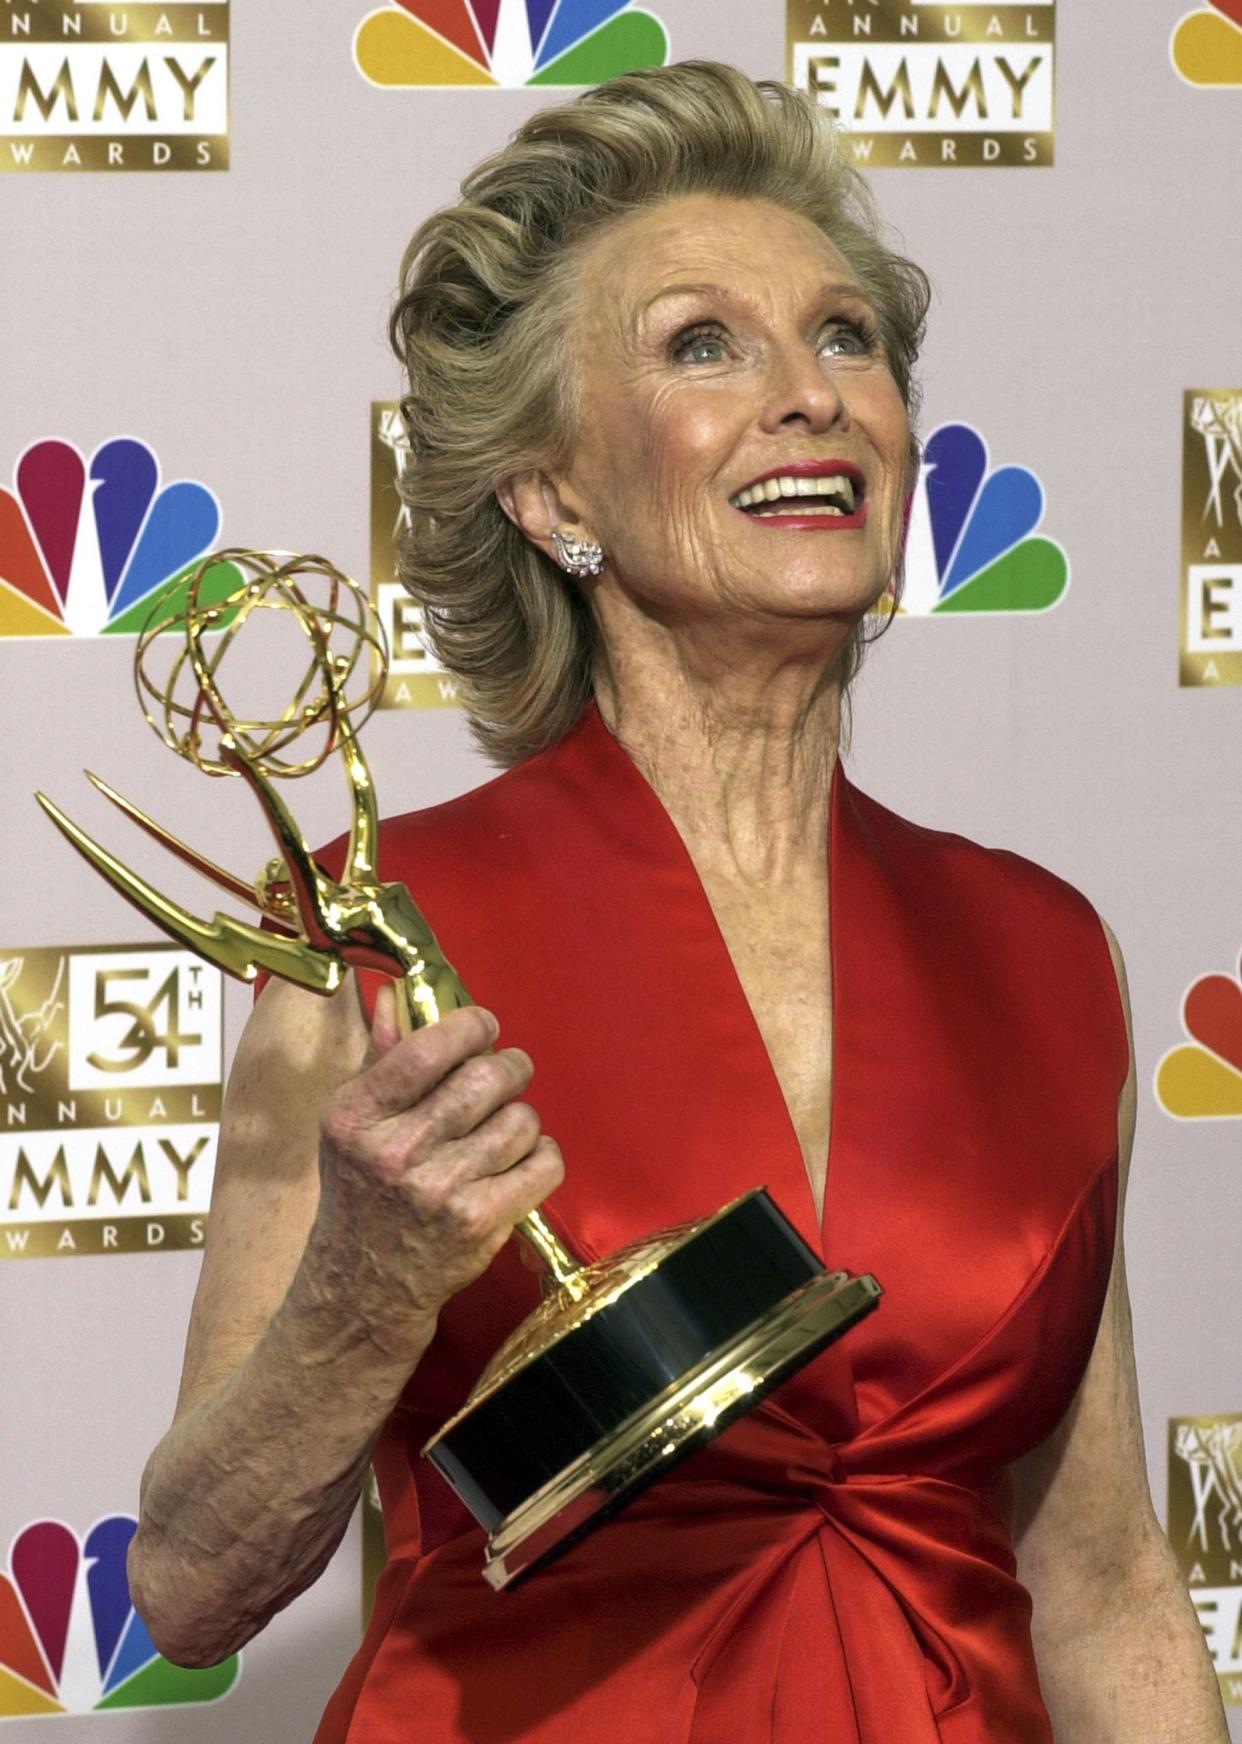 Emmy Award-winning actress Cloris Leachman, who got her fame on "The Mary Tyler Moore Show" in 1970, died Wednesday, Jan. 27, 2021. She was 94.